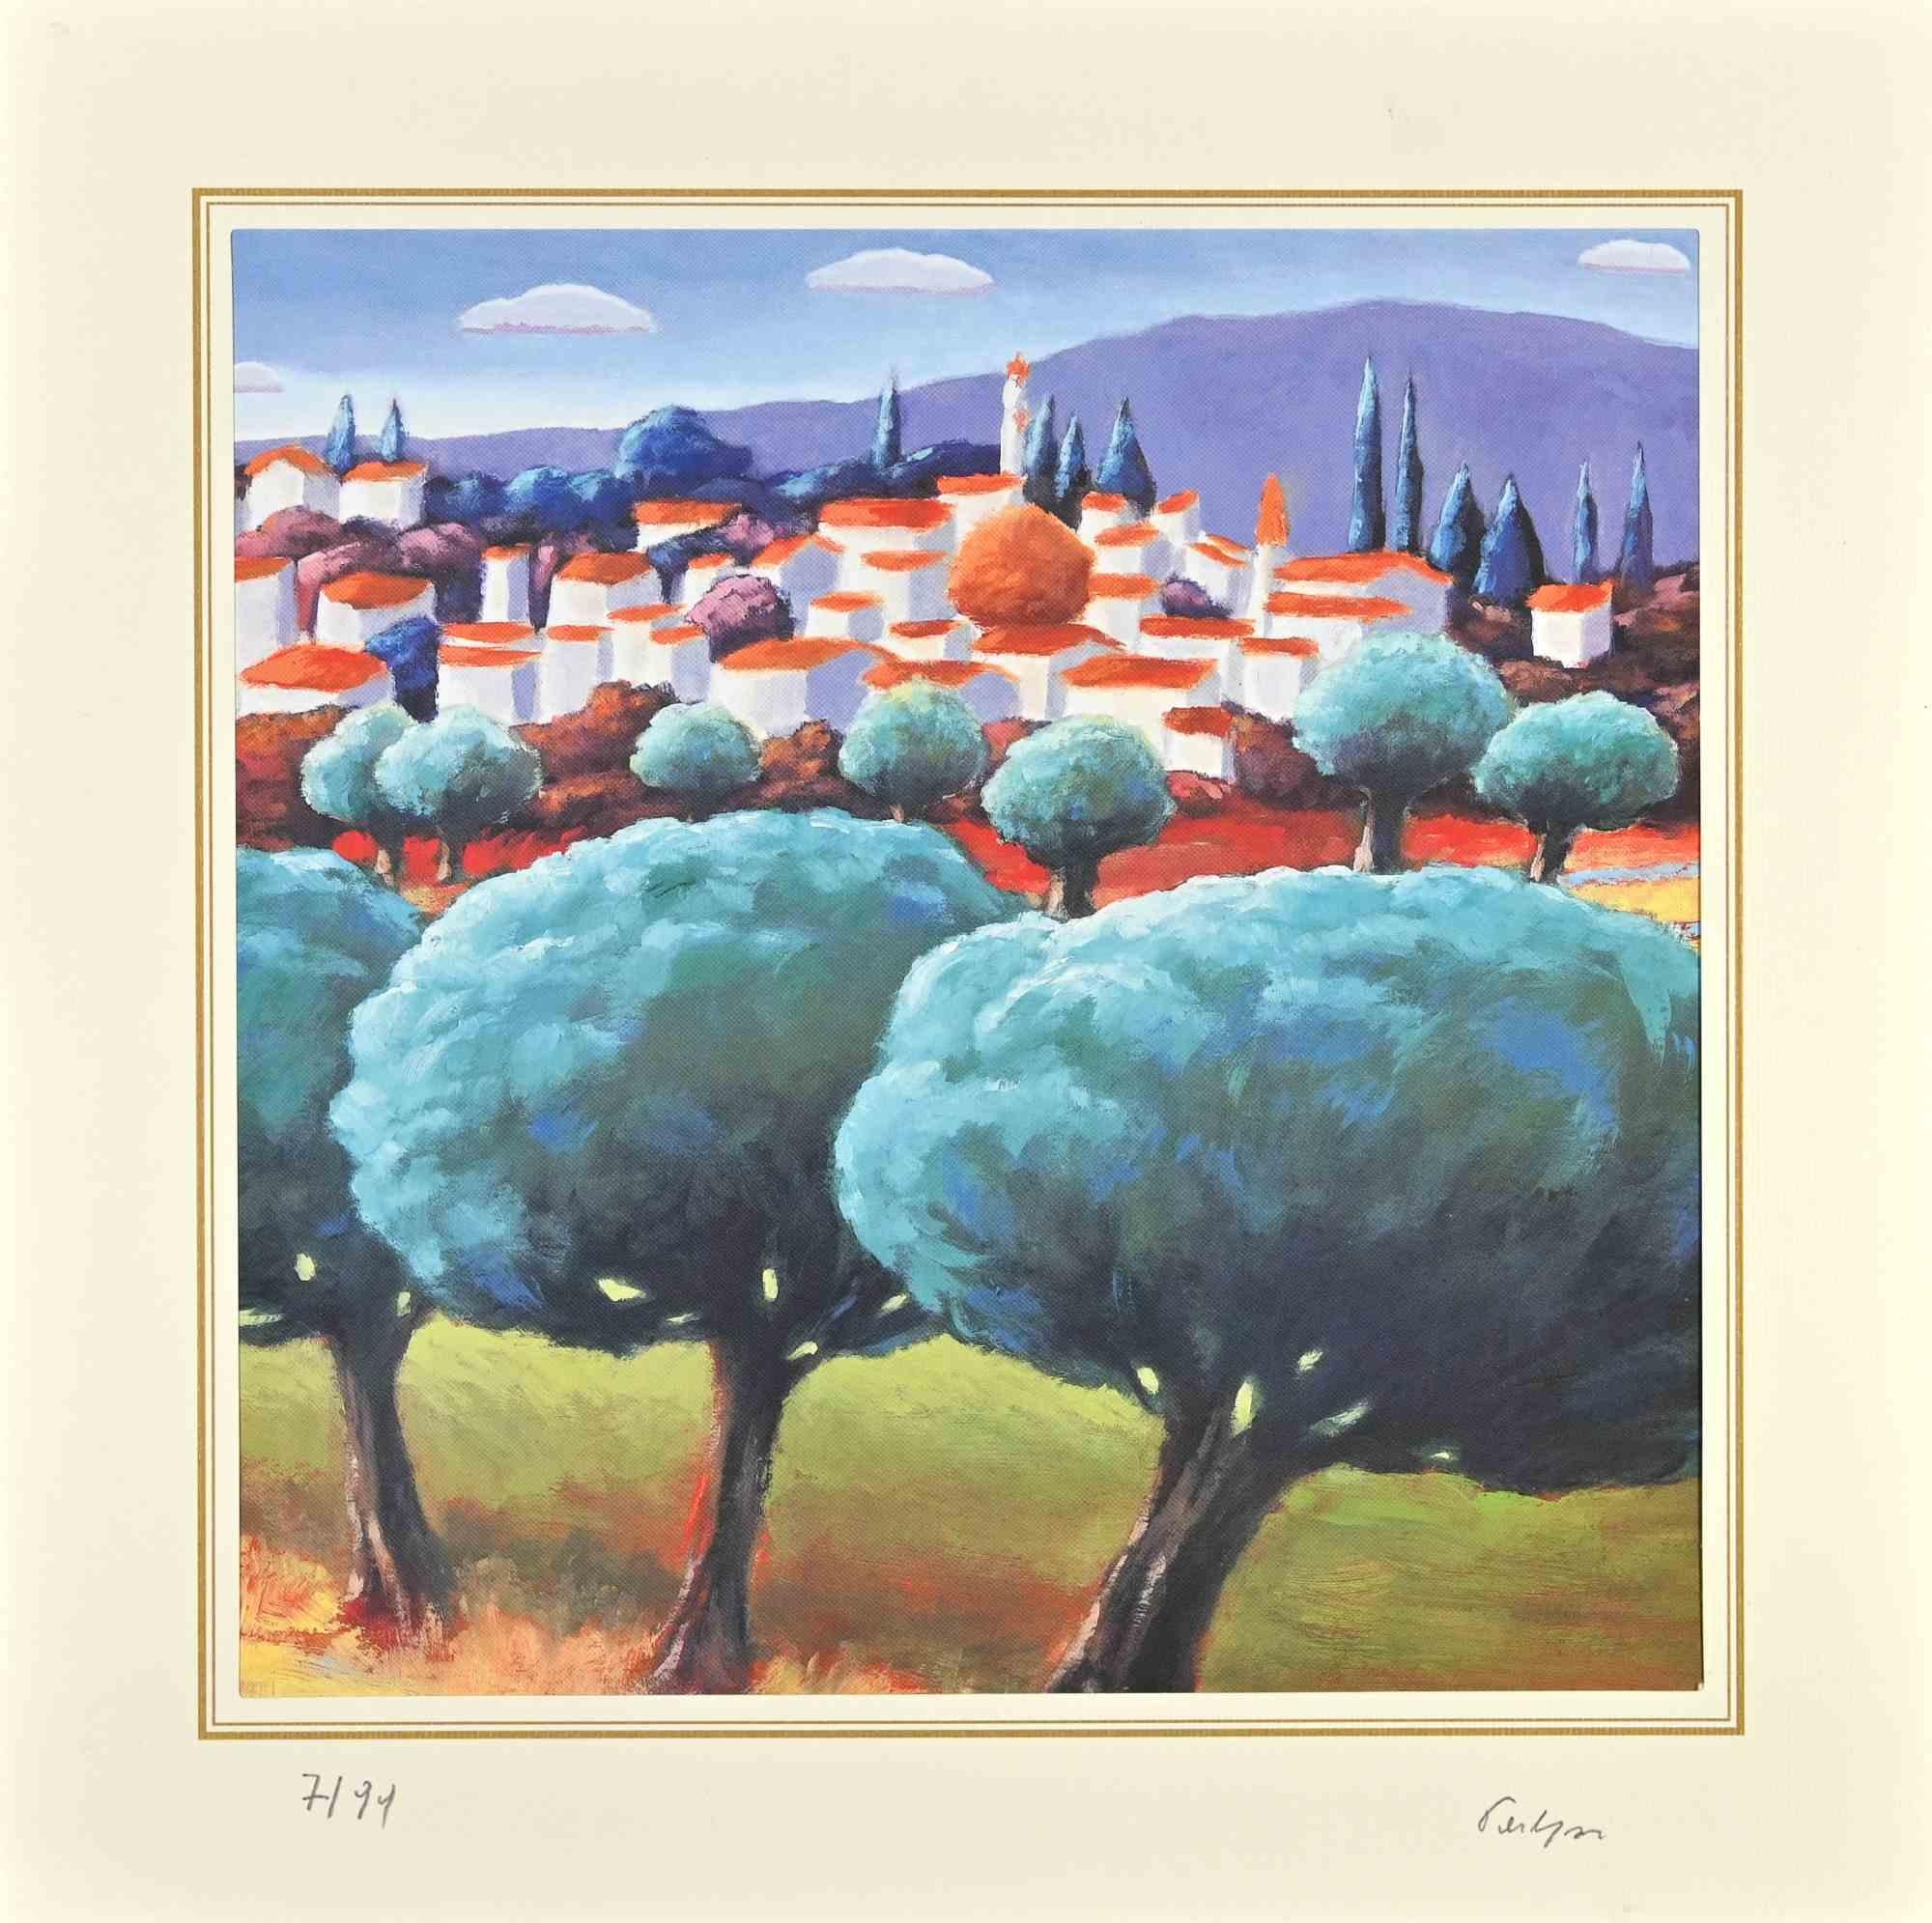 Landscape is a ithograph realized by Bob Paulson in the 2000s

Numbered, Edition, 7/99.

Hand-signed.

The artwork is depicted through harmonious colors in a well-balanced composition.